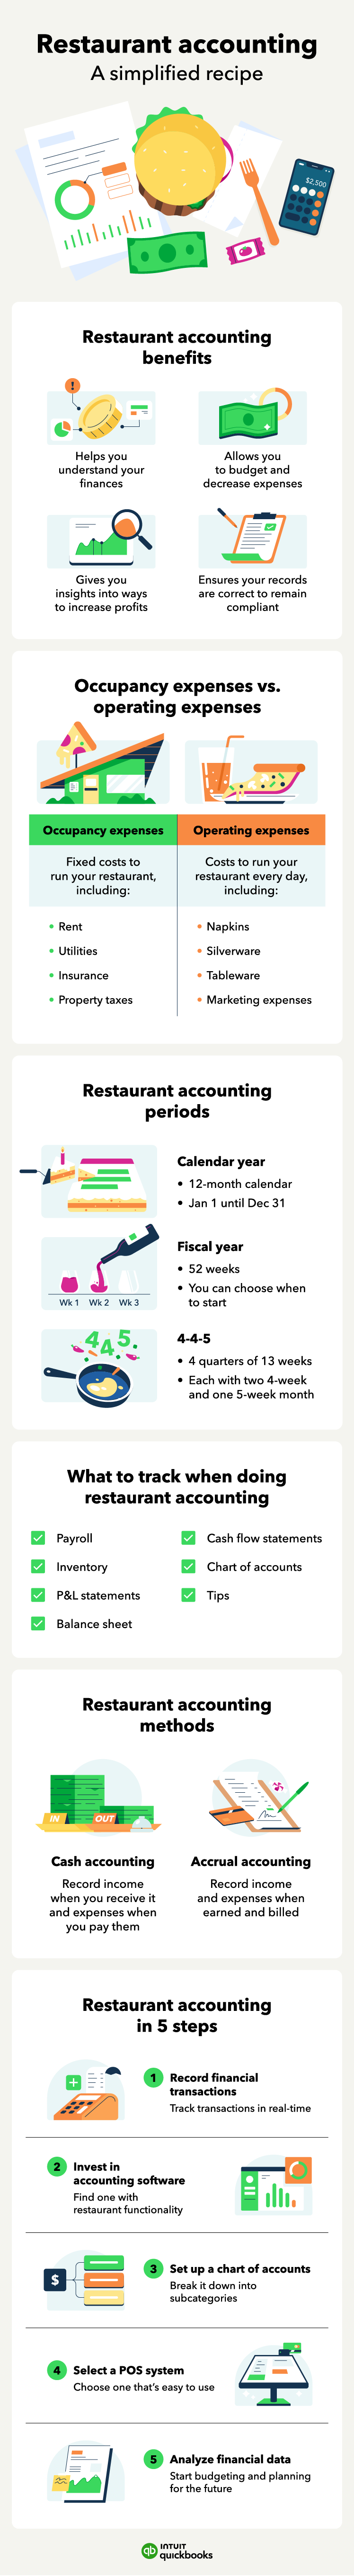 An infographic overviews restaurant accounting, including benefits, accounting periods and methods, and how to do it.